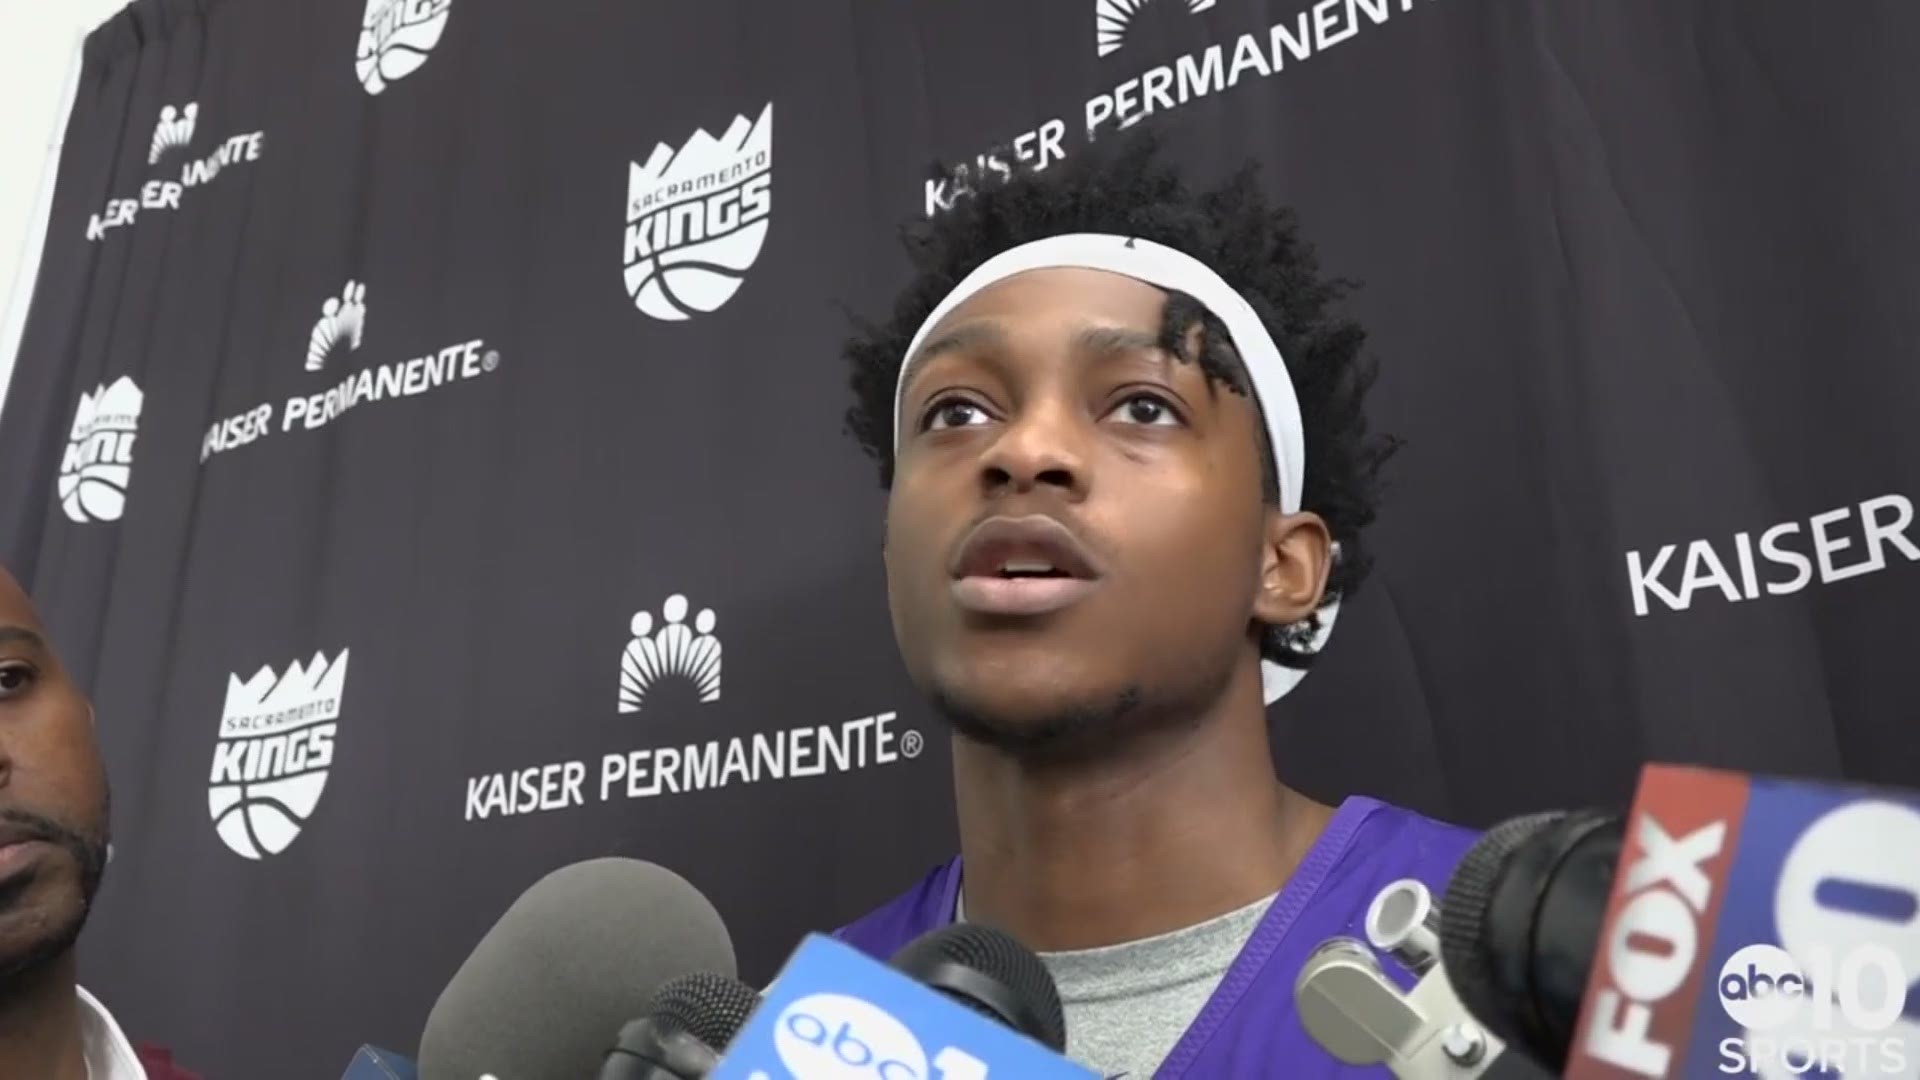 Kings PG De’Aaron Fox discusses how his team is handling the adversity of the 0-5 start to the season and the impact the losing streak has had on his teammates.